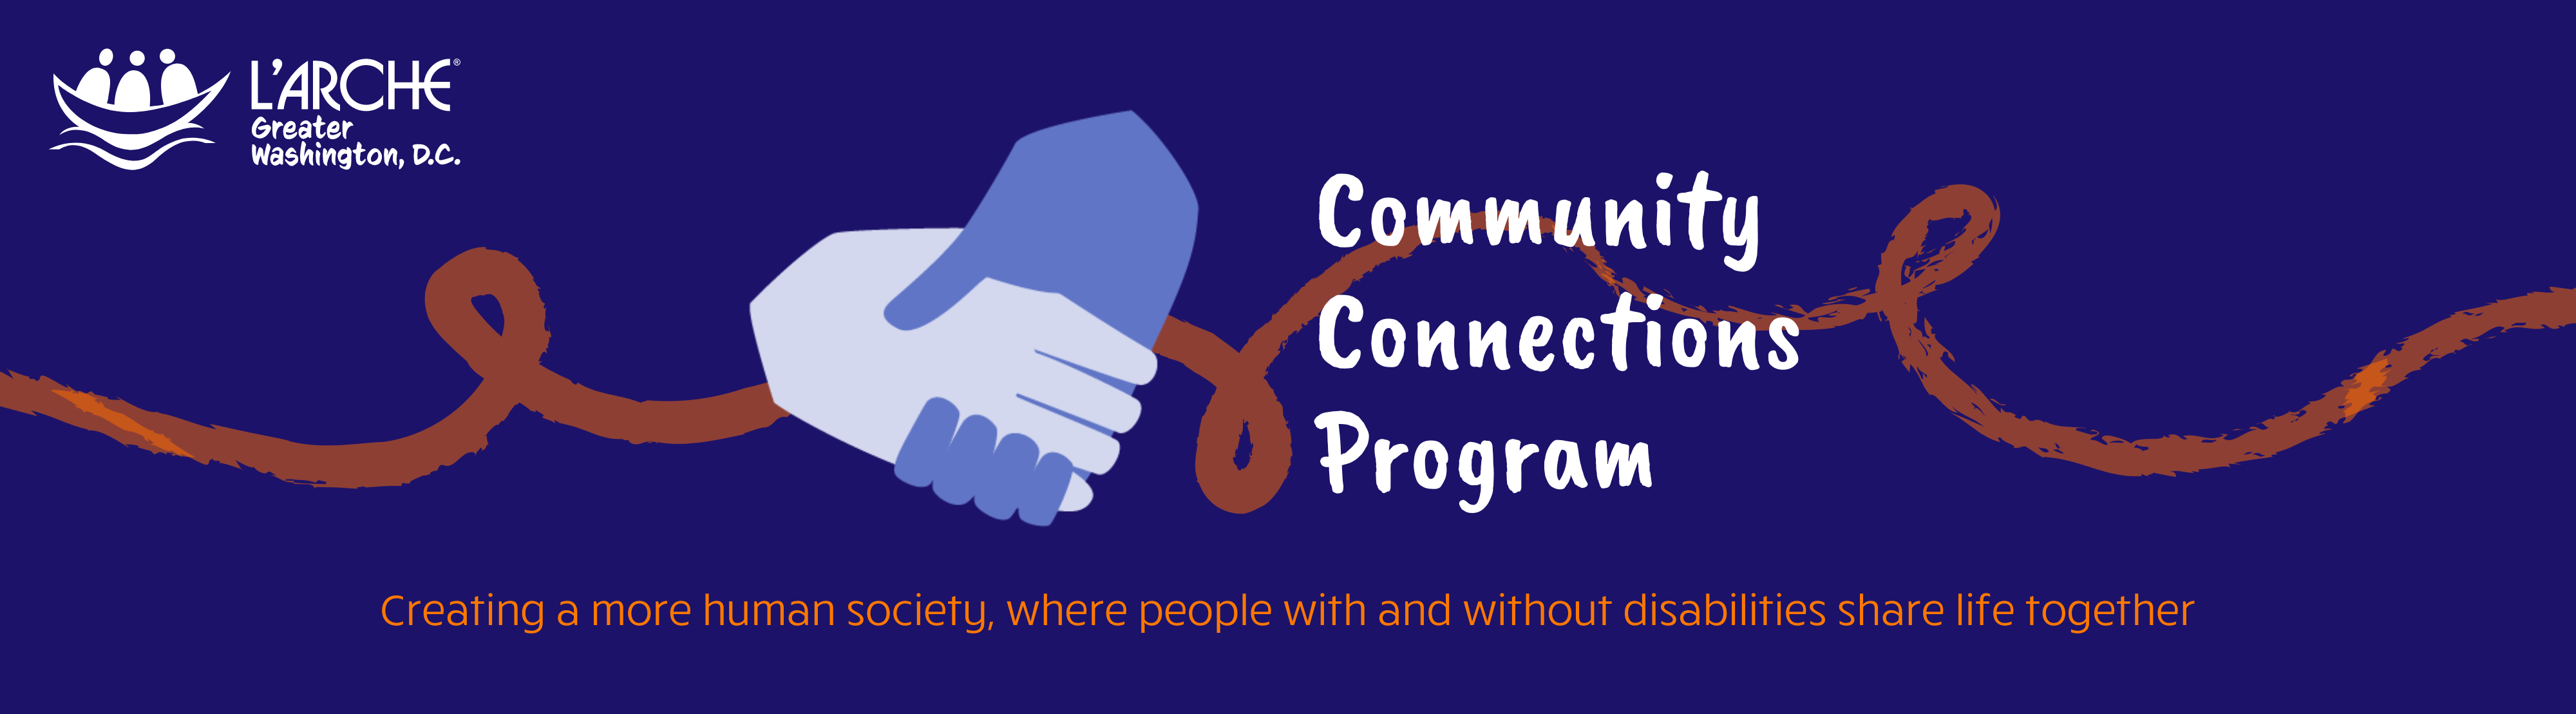 Two hands joining form a heart symbol. Text reads "Community Connections Program." Creating a more human society where people with and without disabilities share life together. L'Arche Greater Washington, DC logo in left corner.